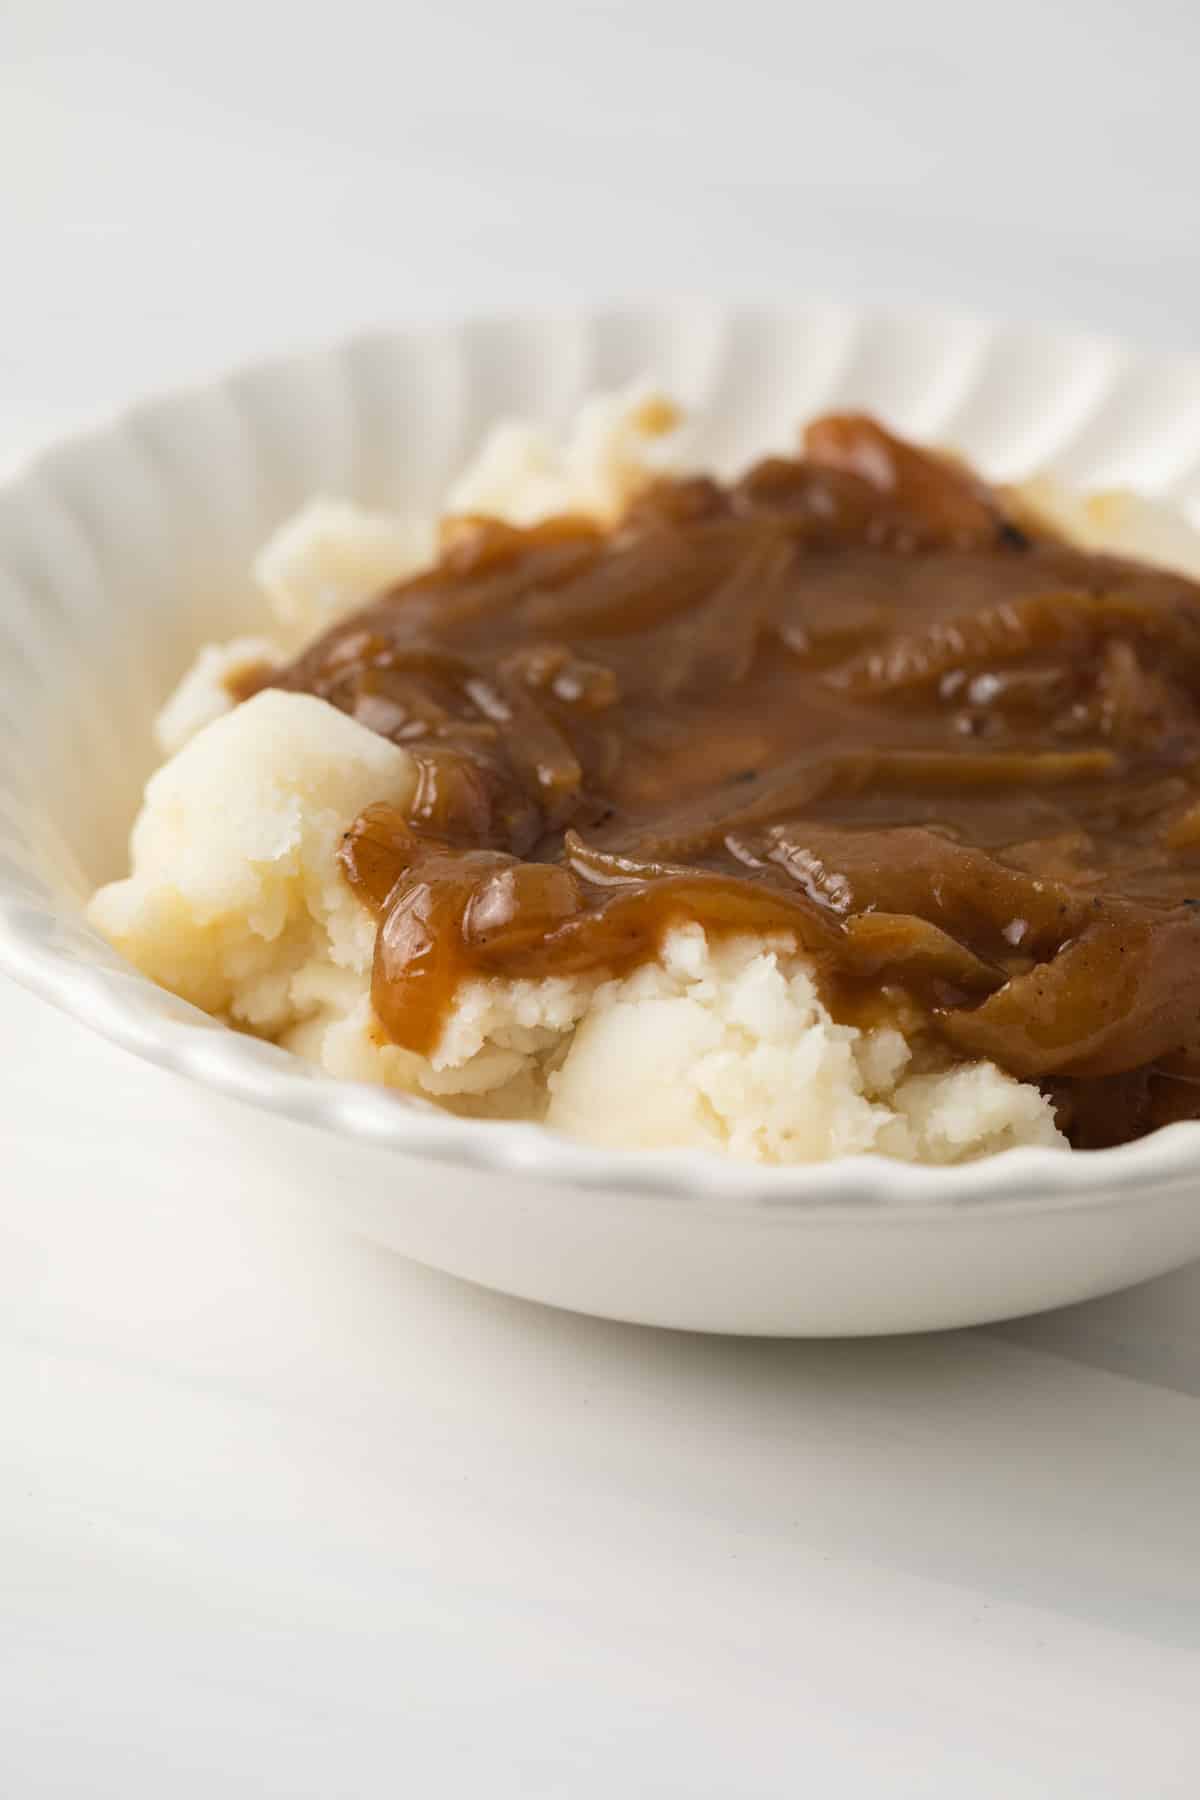 Mashed potatoes topped with onion gravy.